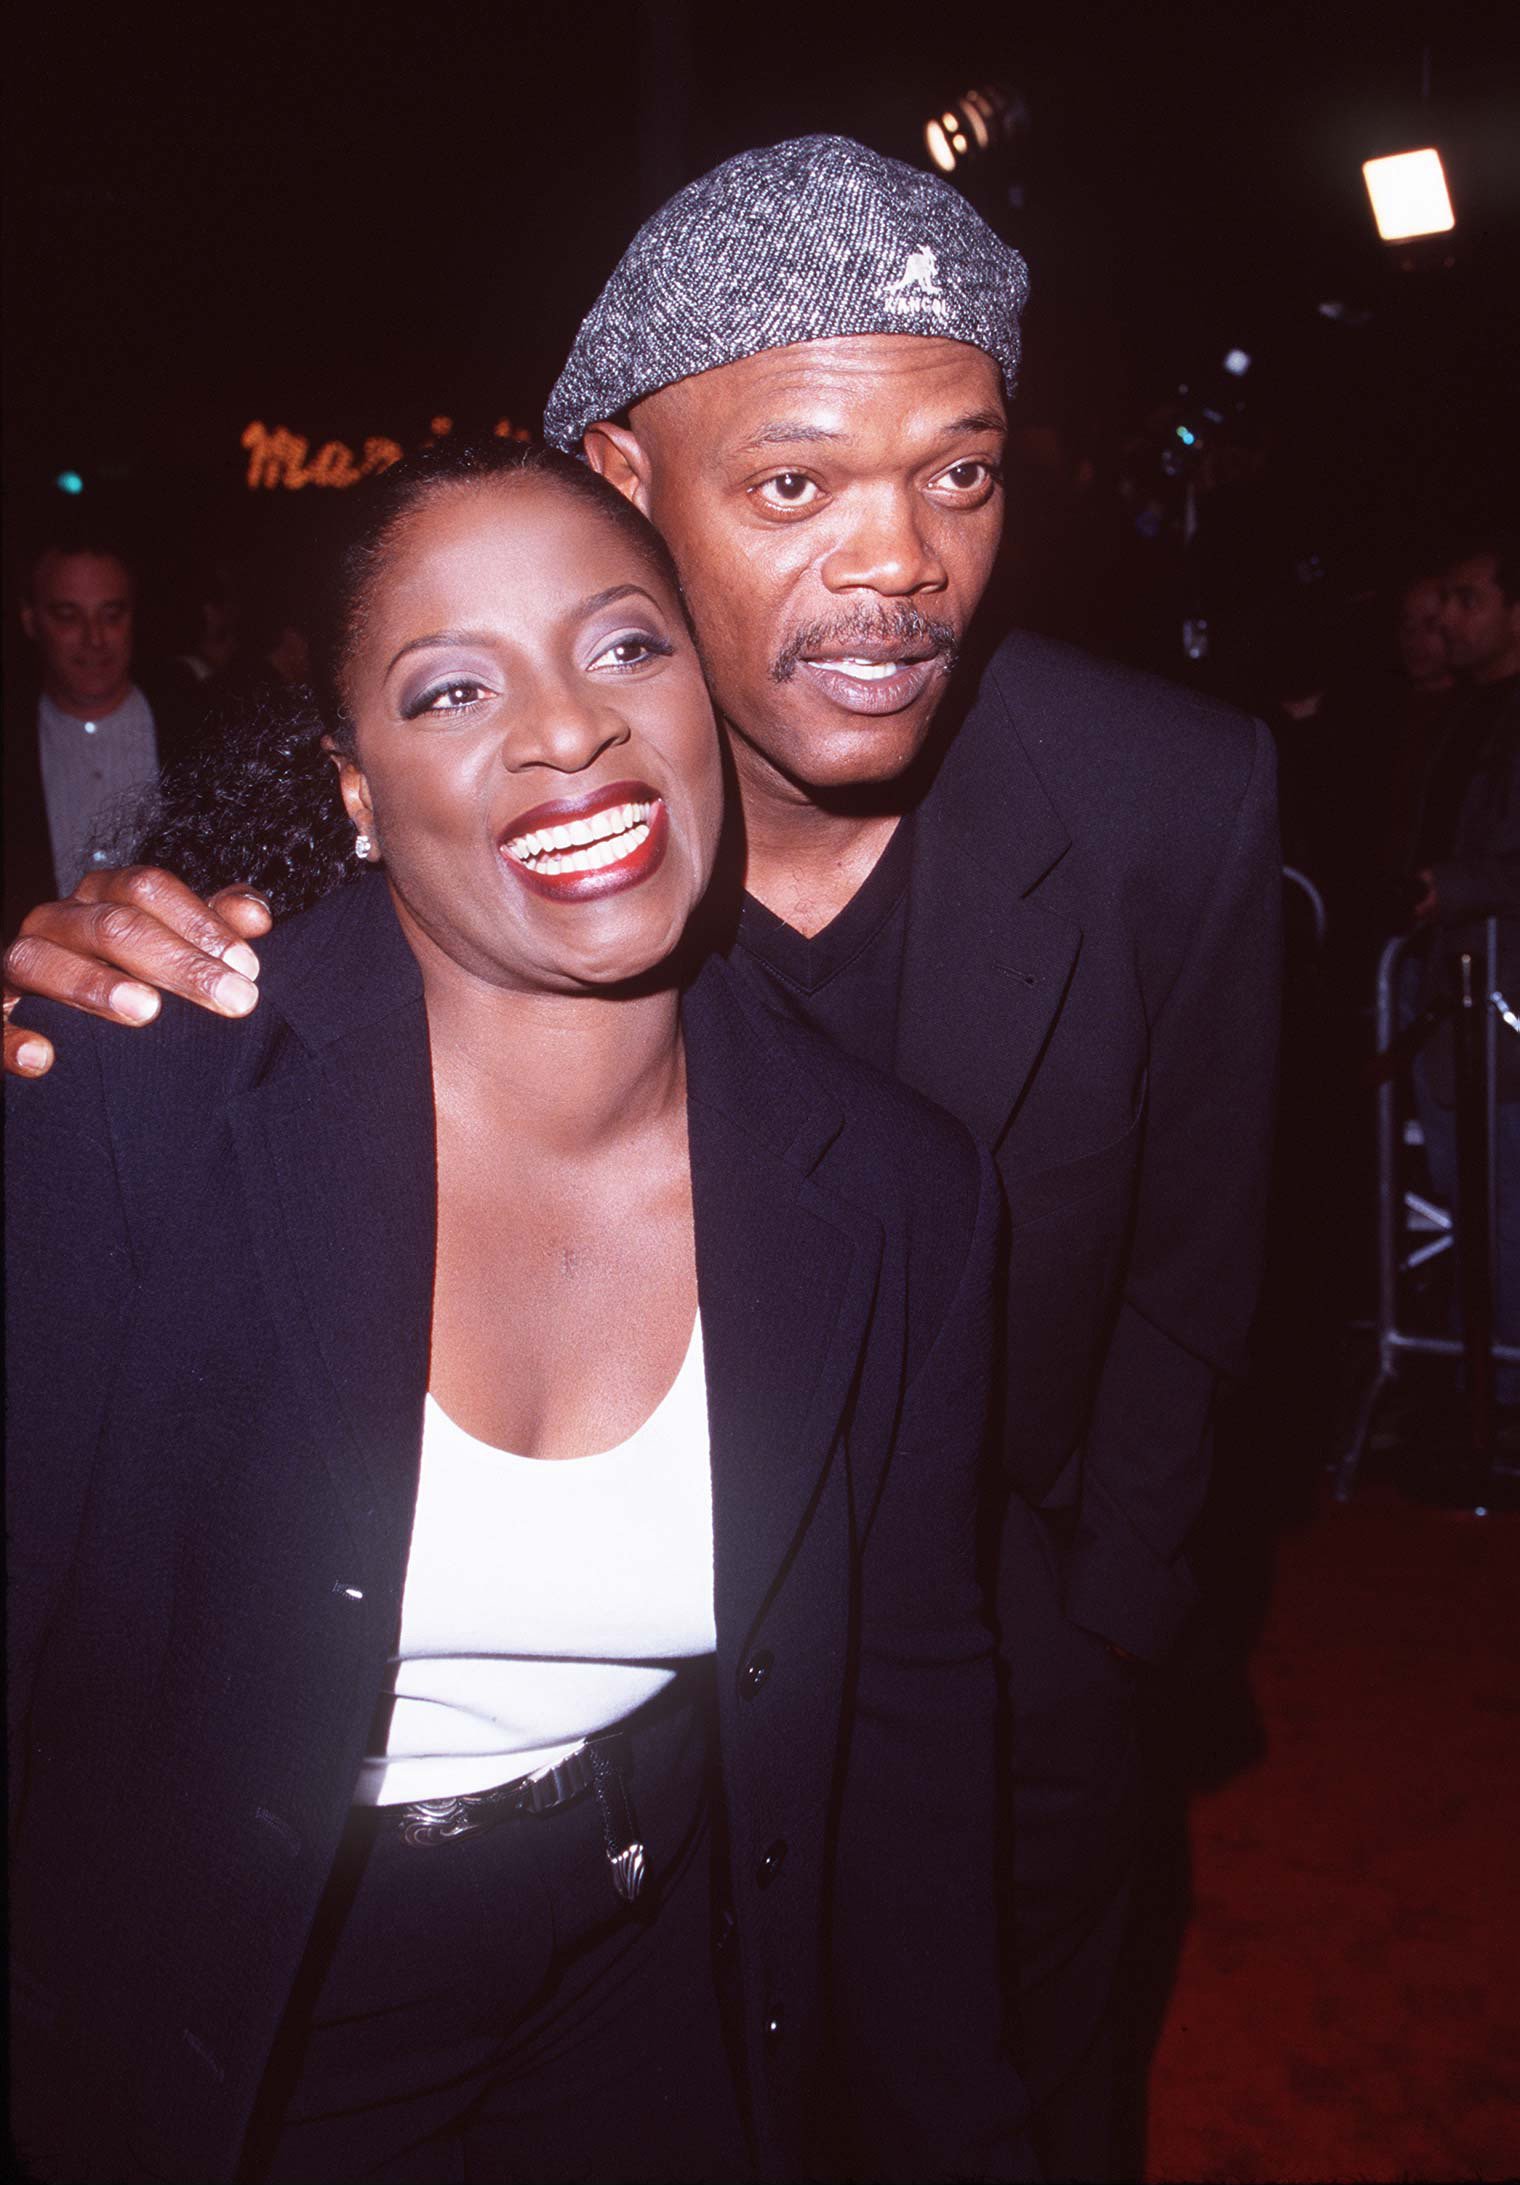 Samuel L. Jackson (right) and LaTanya Richardson during "U.S. Marshals" Los Angeles Premiere at Mann Village Theatre in Westwood, California, United States | Source: Getty Images 